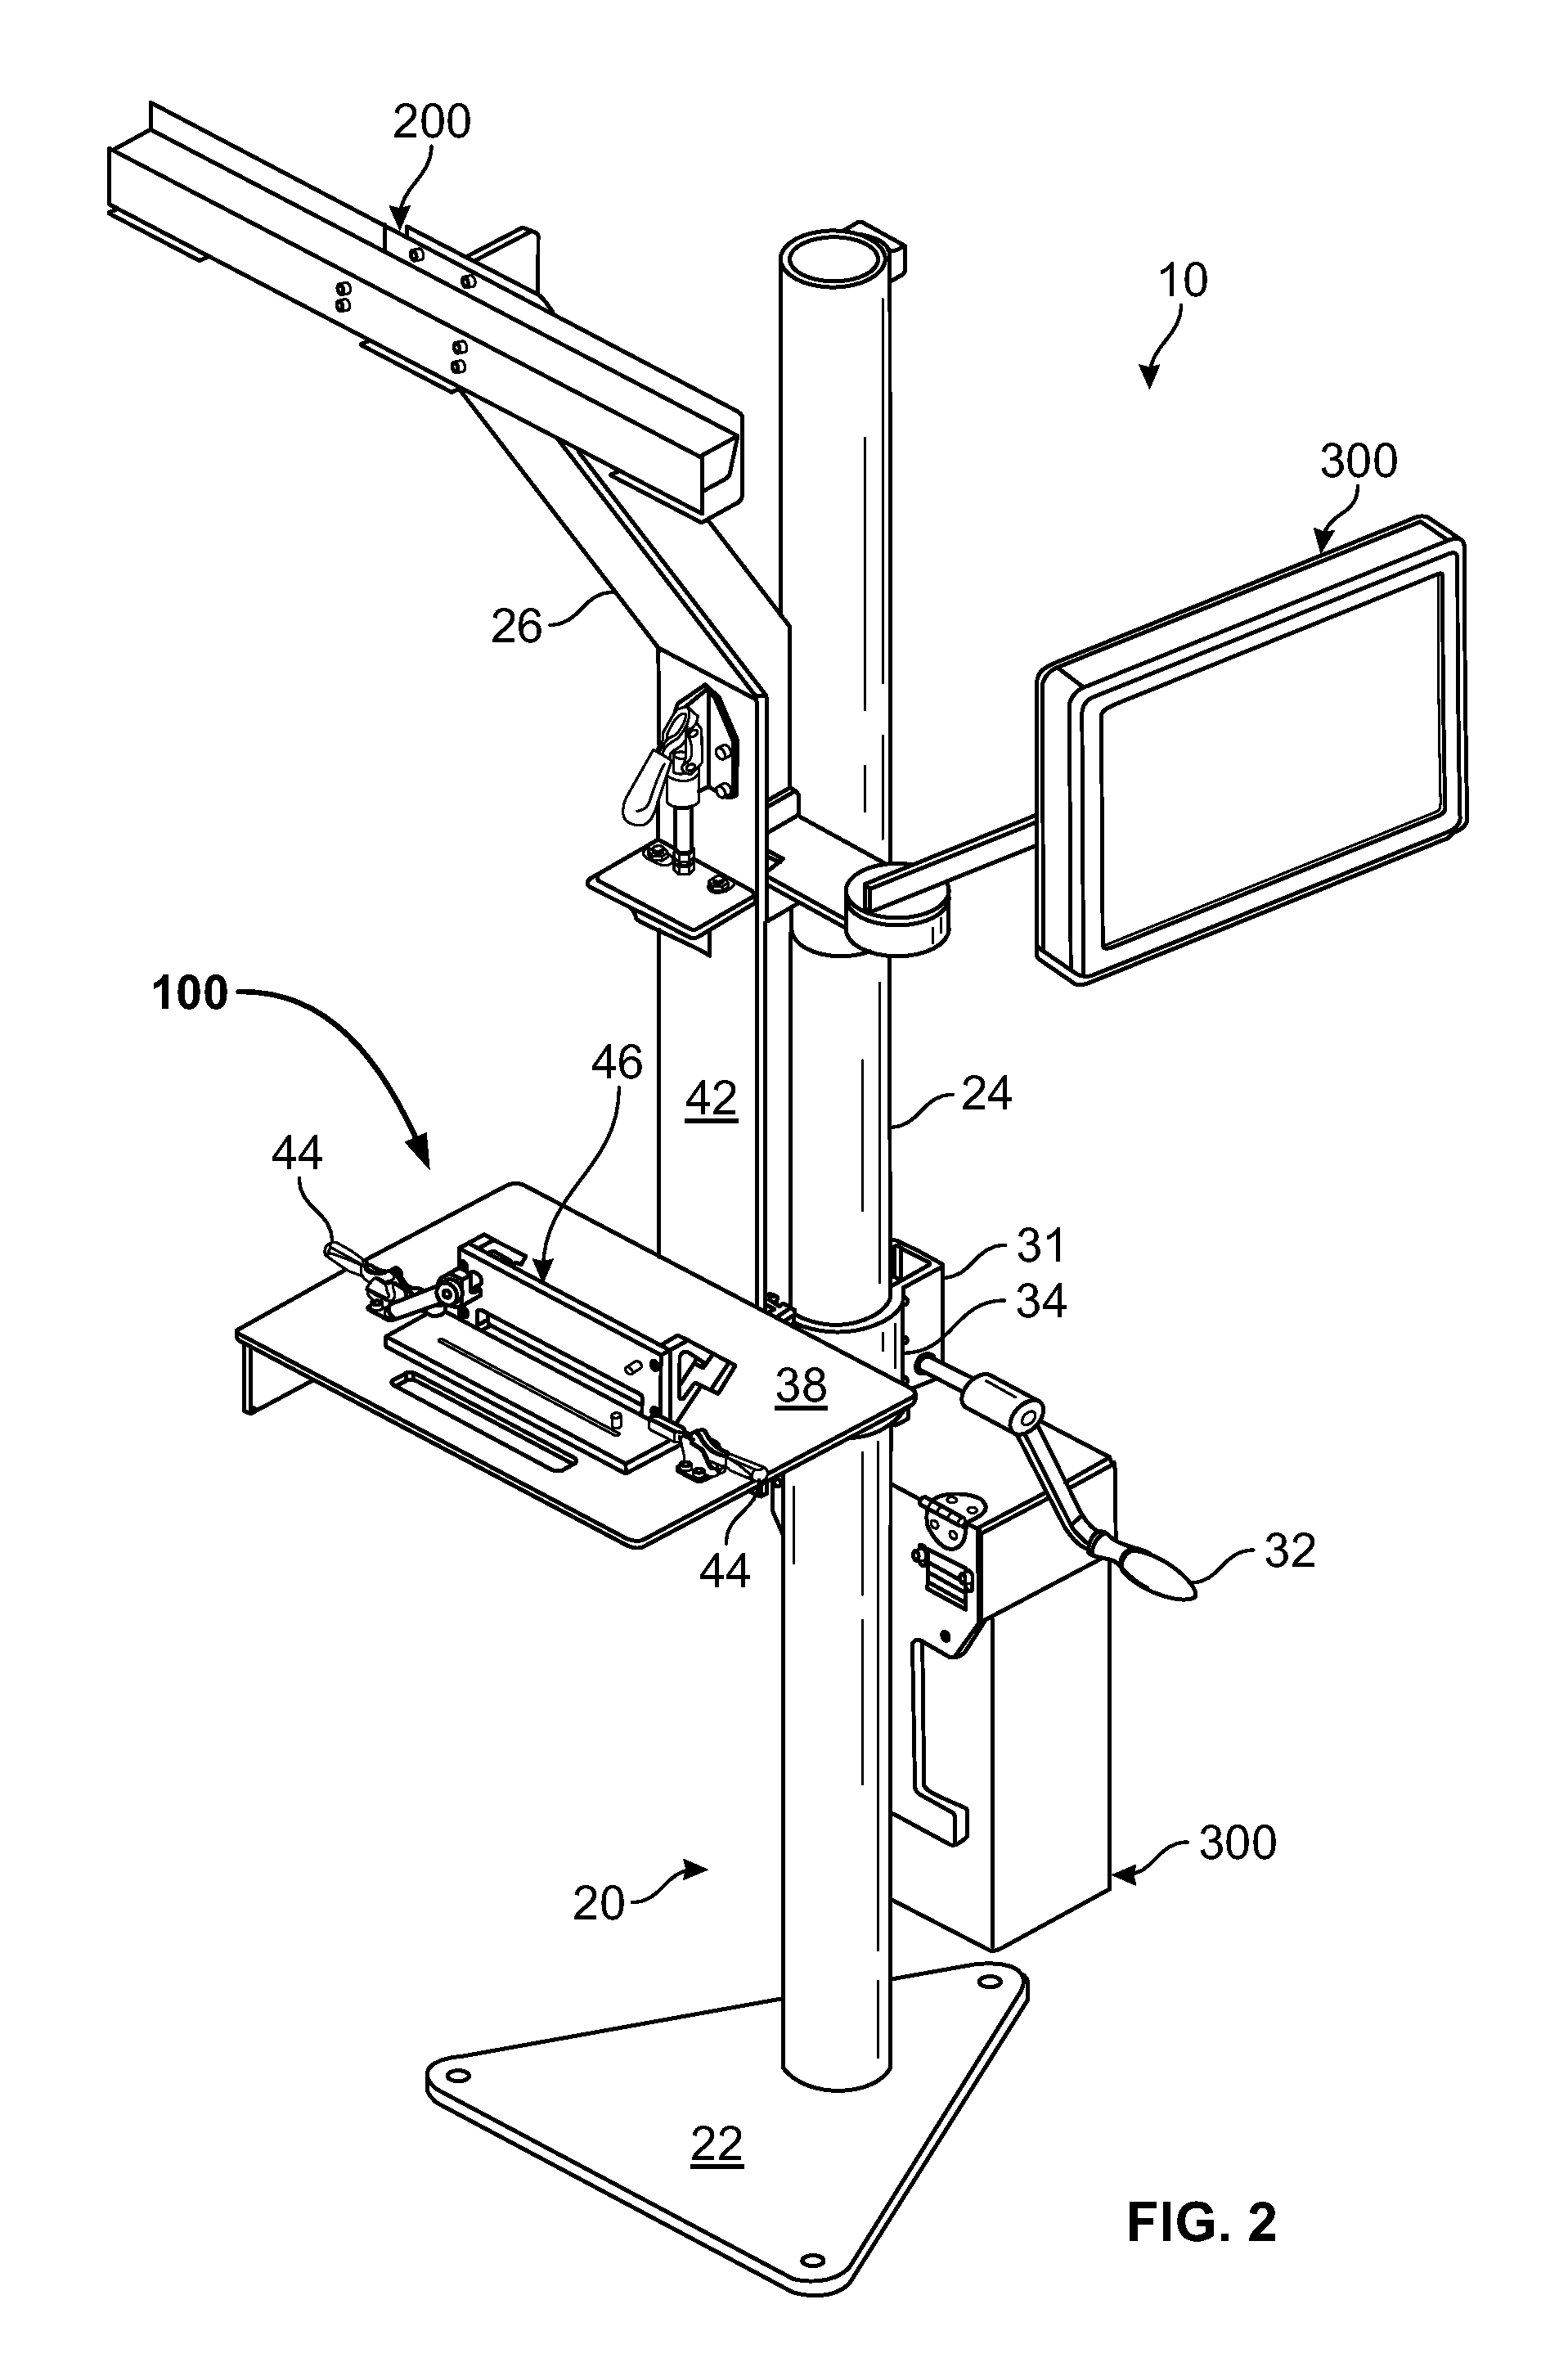 System for characterizing manual welding operations